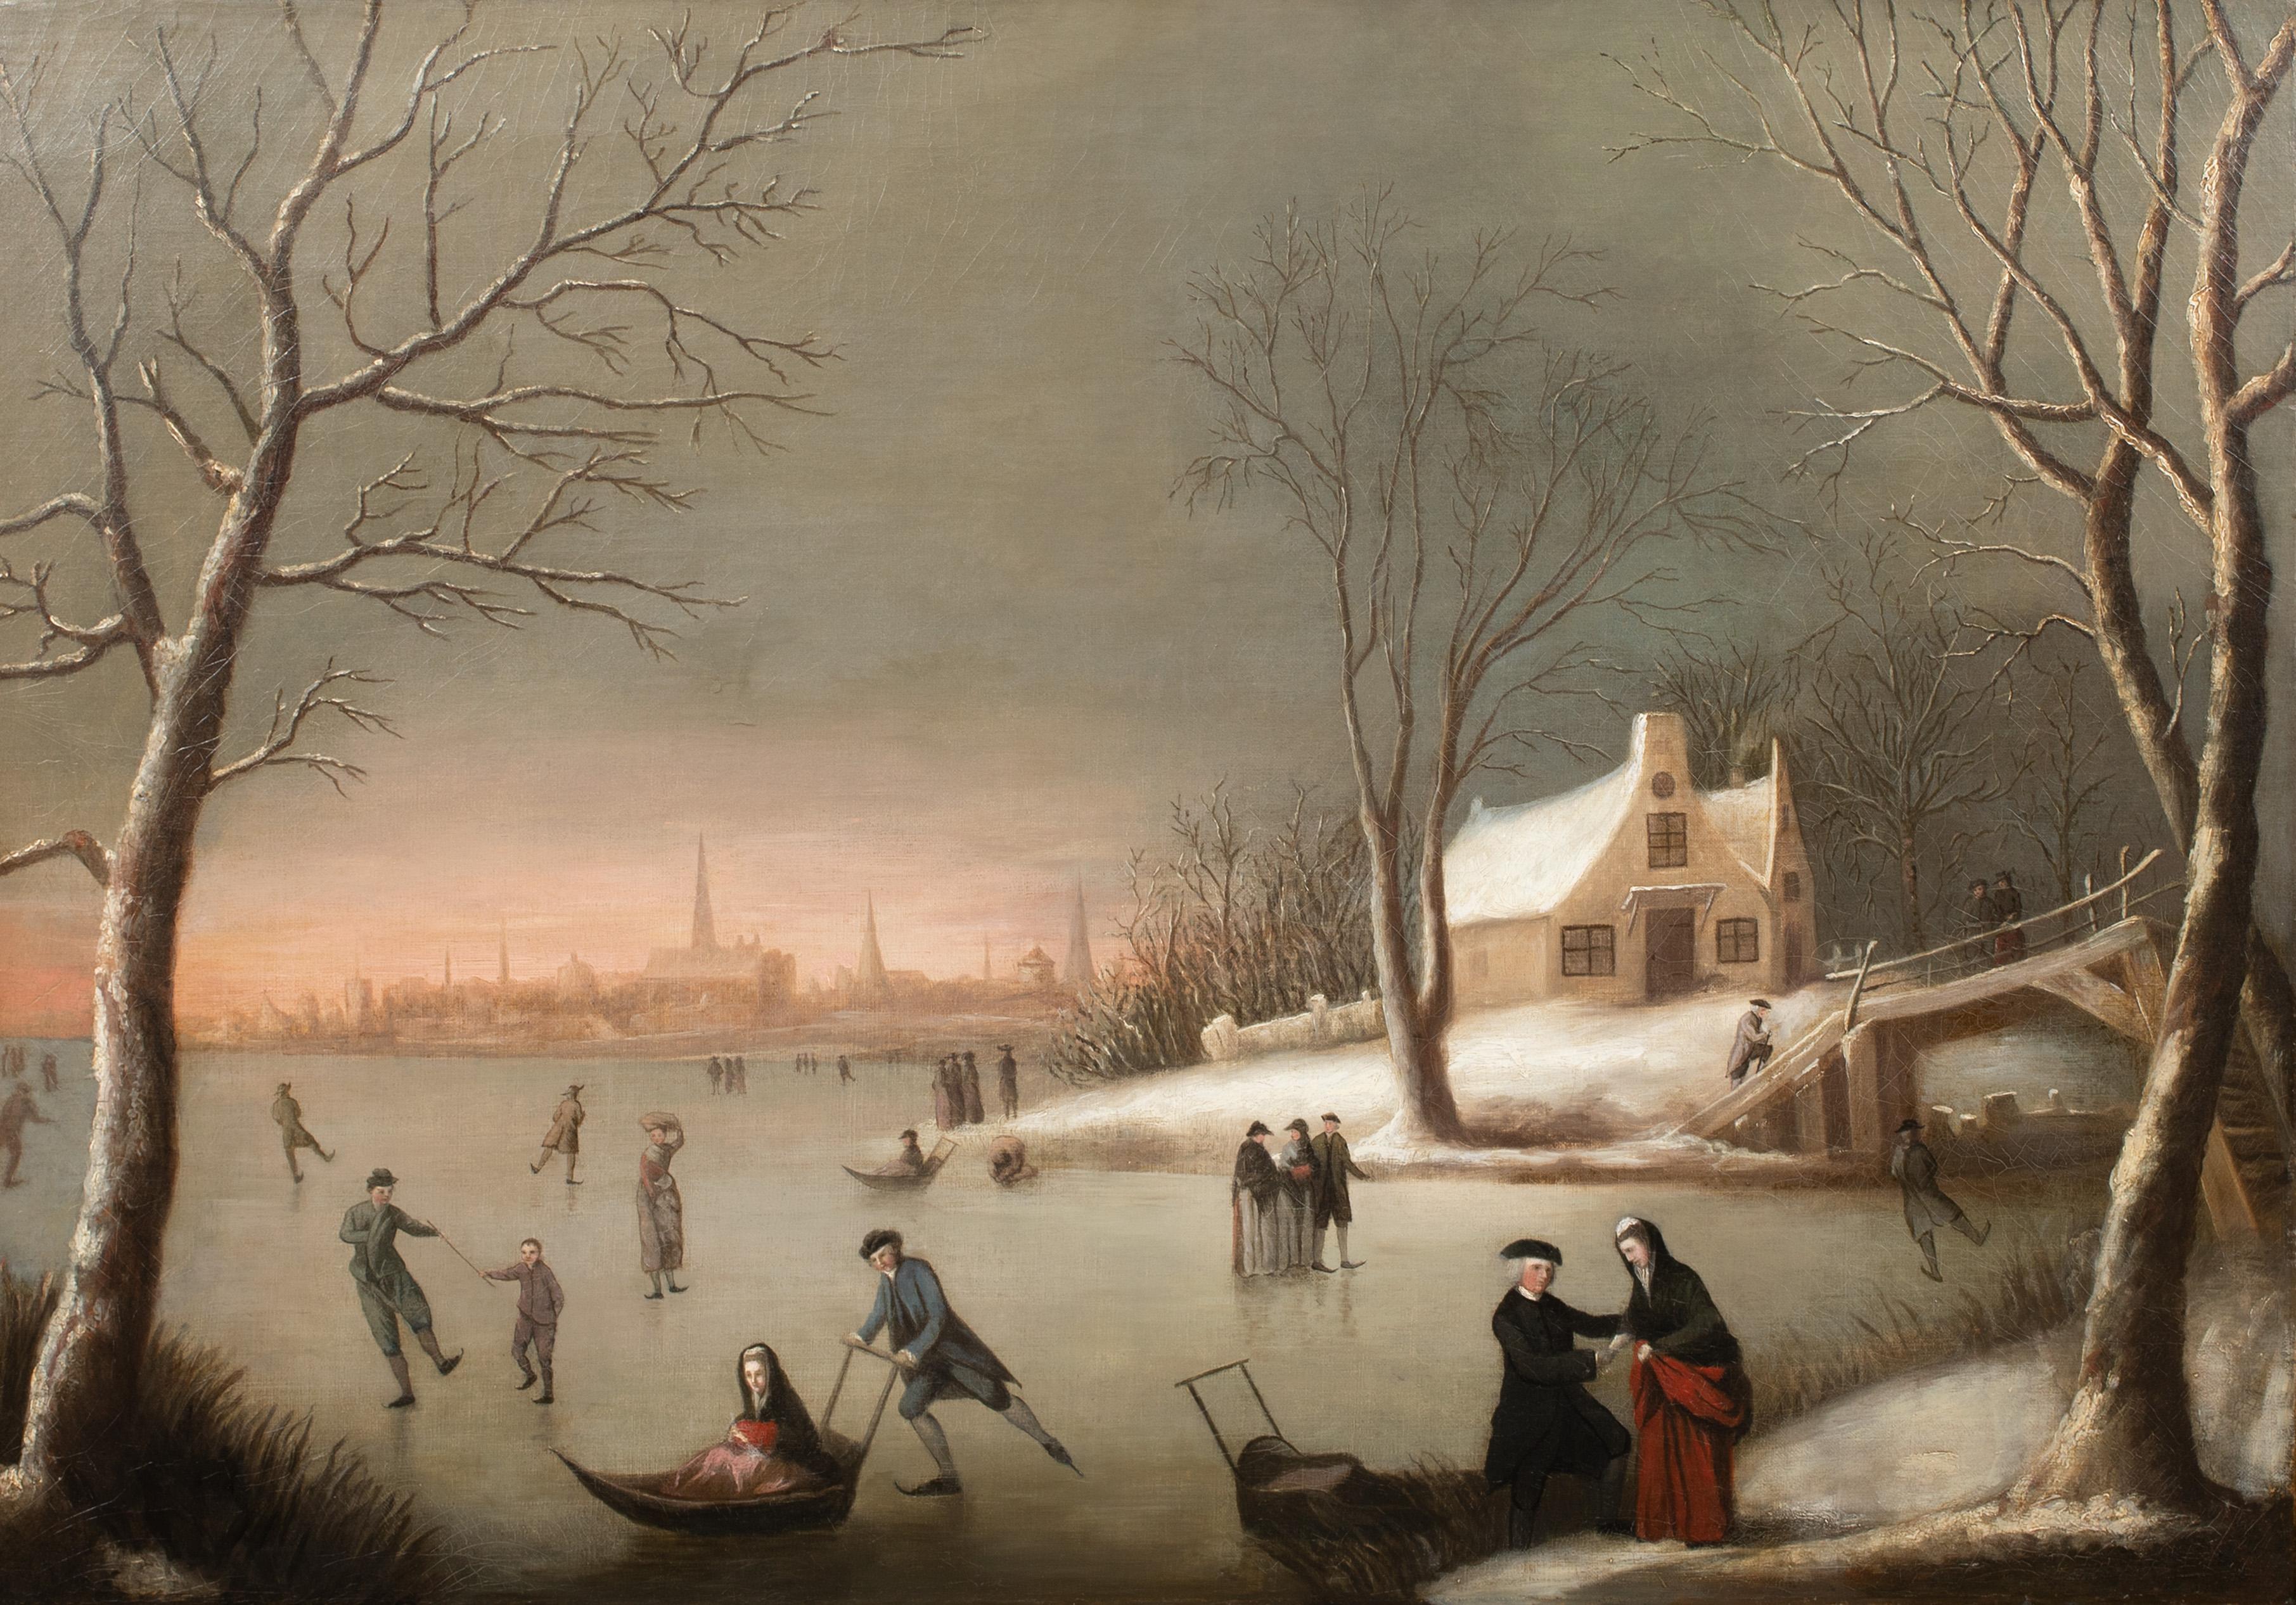 Unknown Portrait Painting - Figures Ice Skating IN A Frozen Winter Landscape, 18th Century 